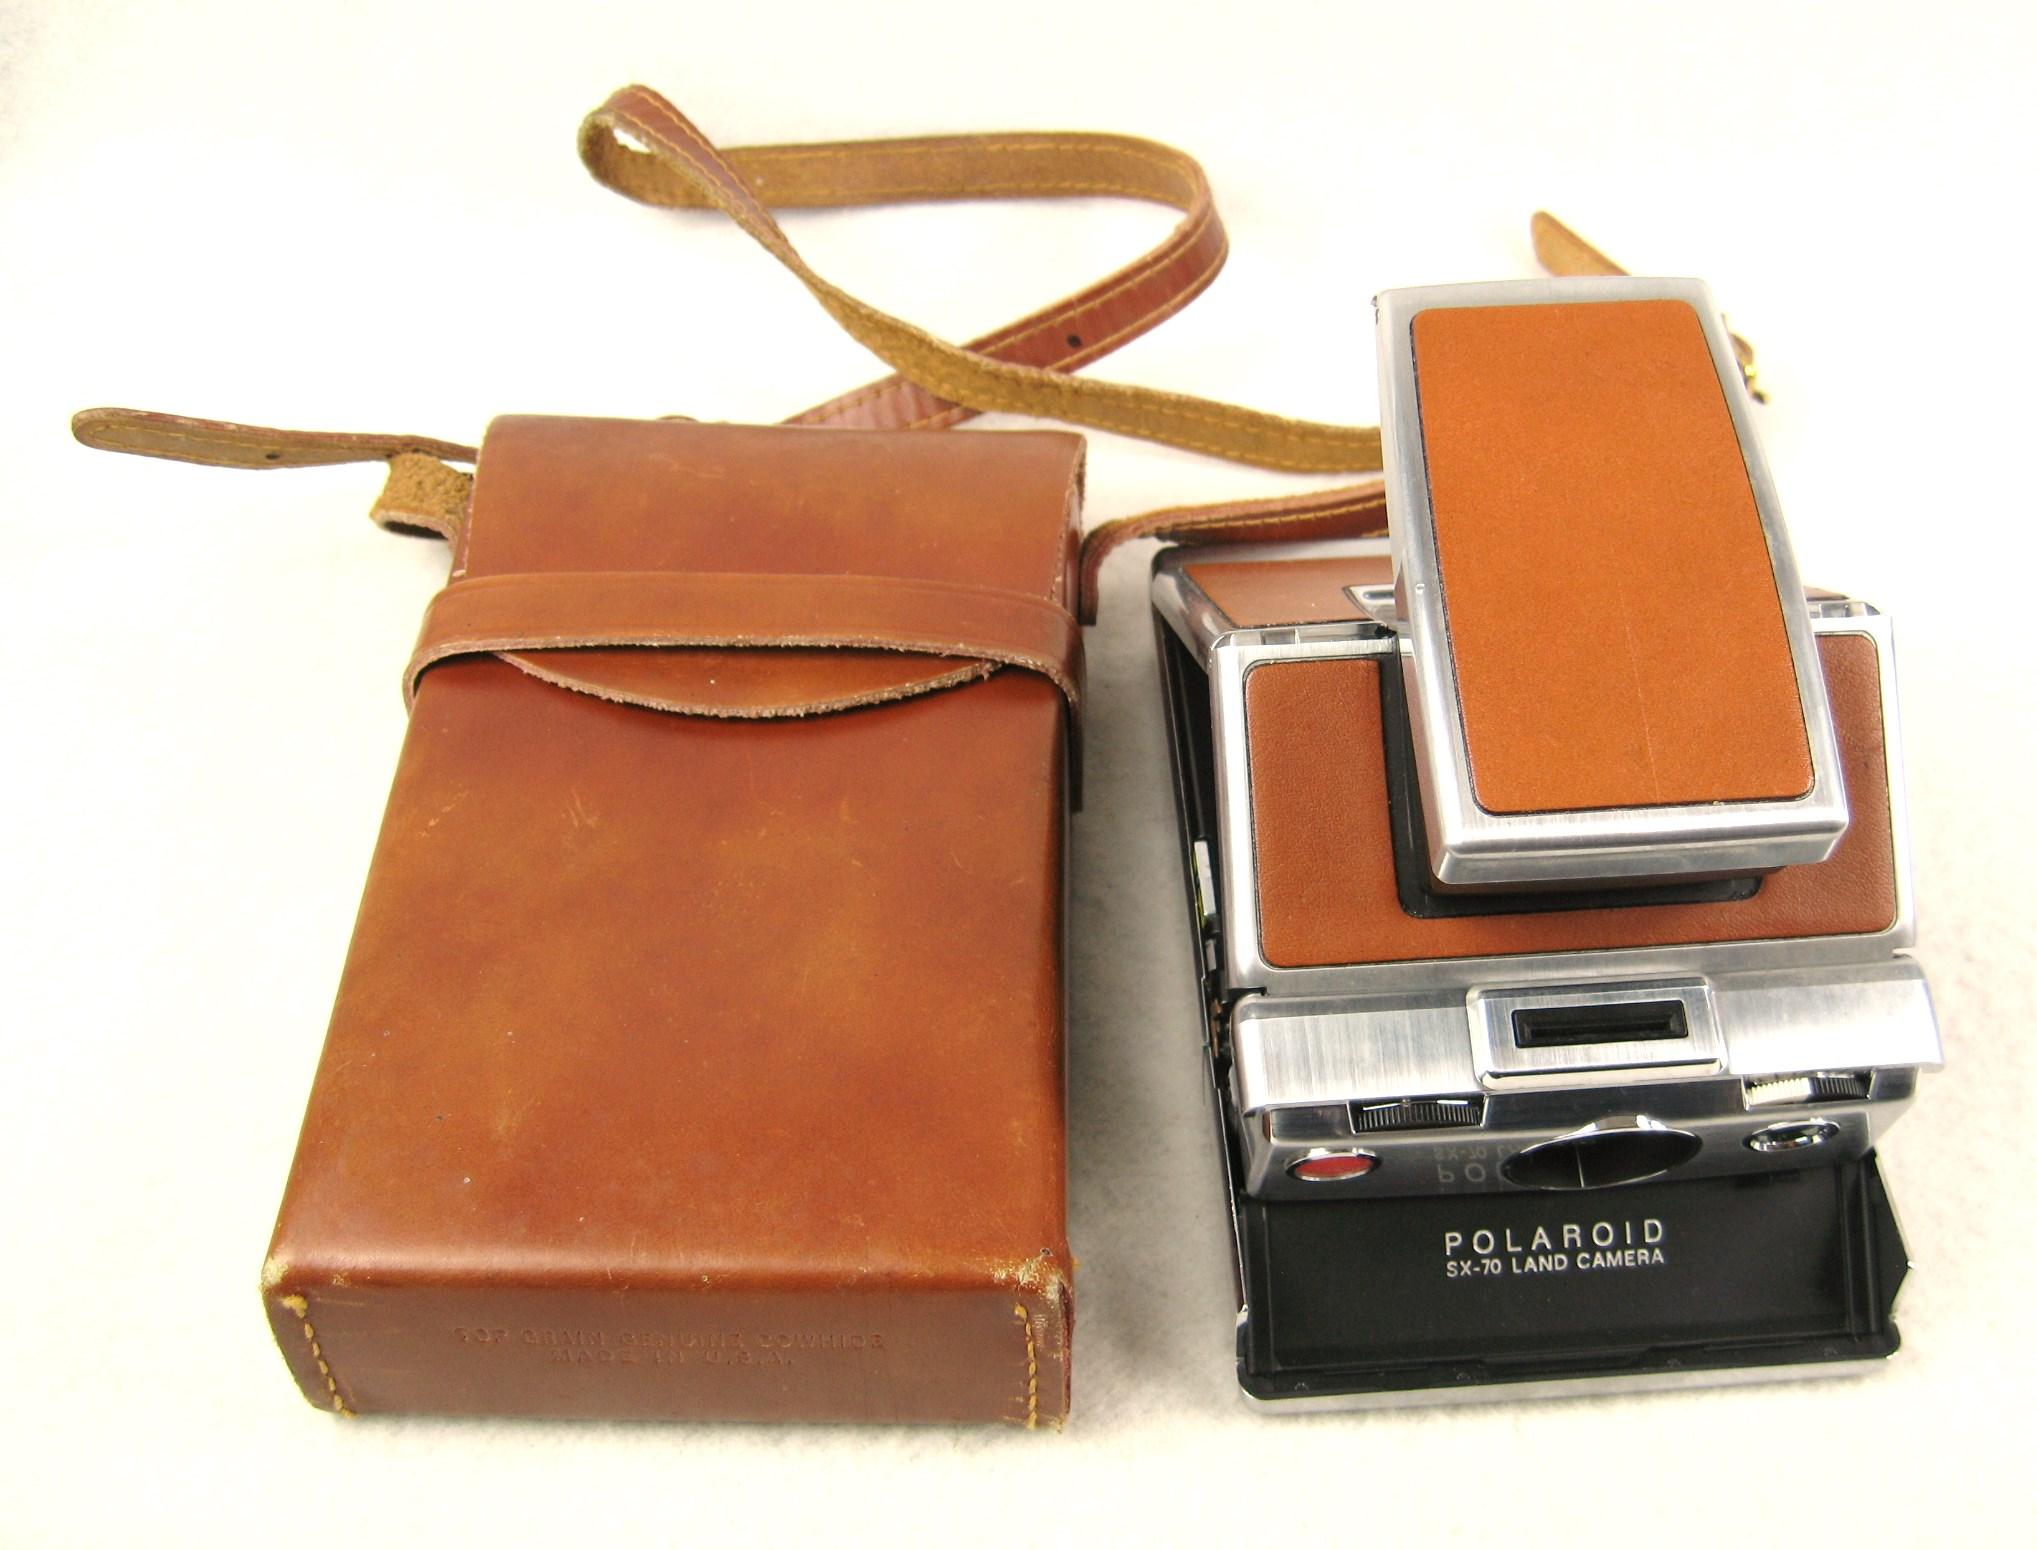 Vintage Polaroid SX-70 Tan Land Camera by Henry Dreyfuss For Sale 7